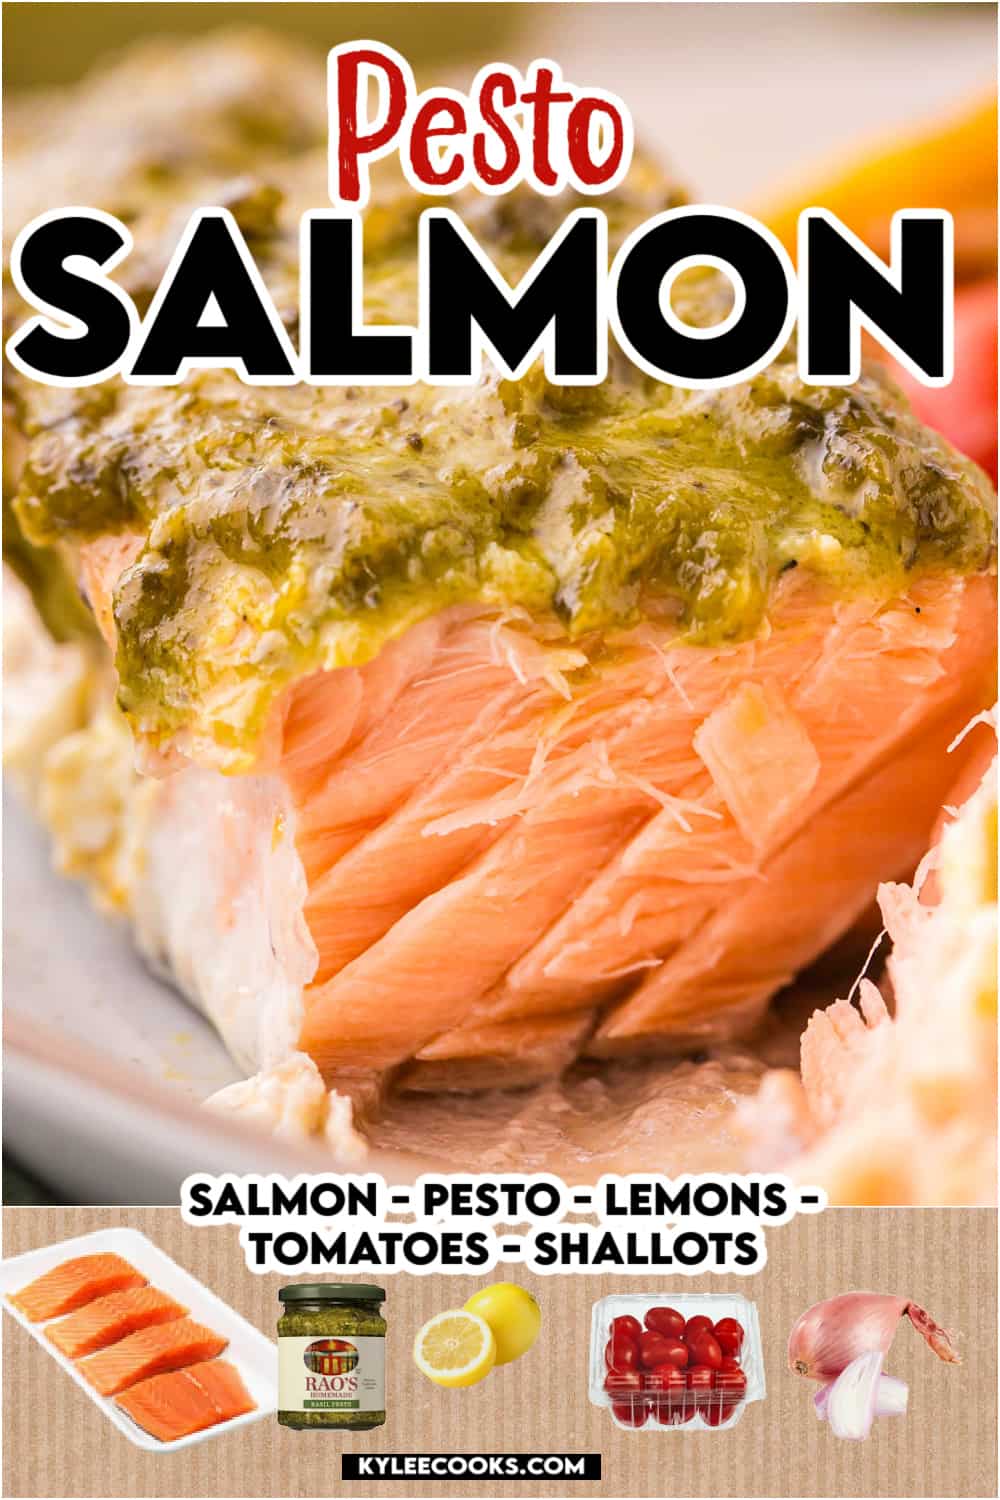 pesto salmon on a plate cut open, with recipe and and ingredients overlaid in text.